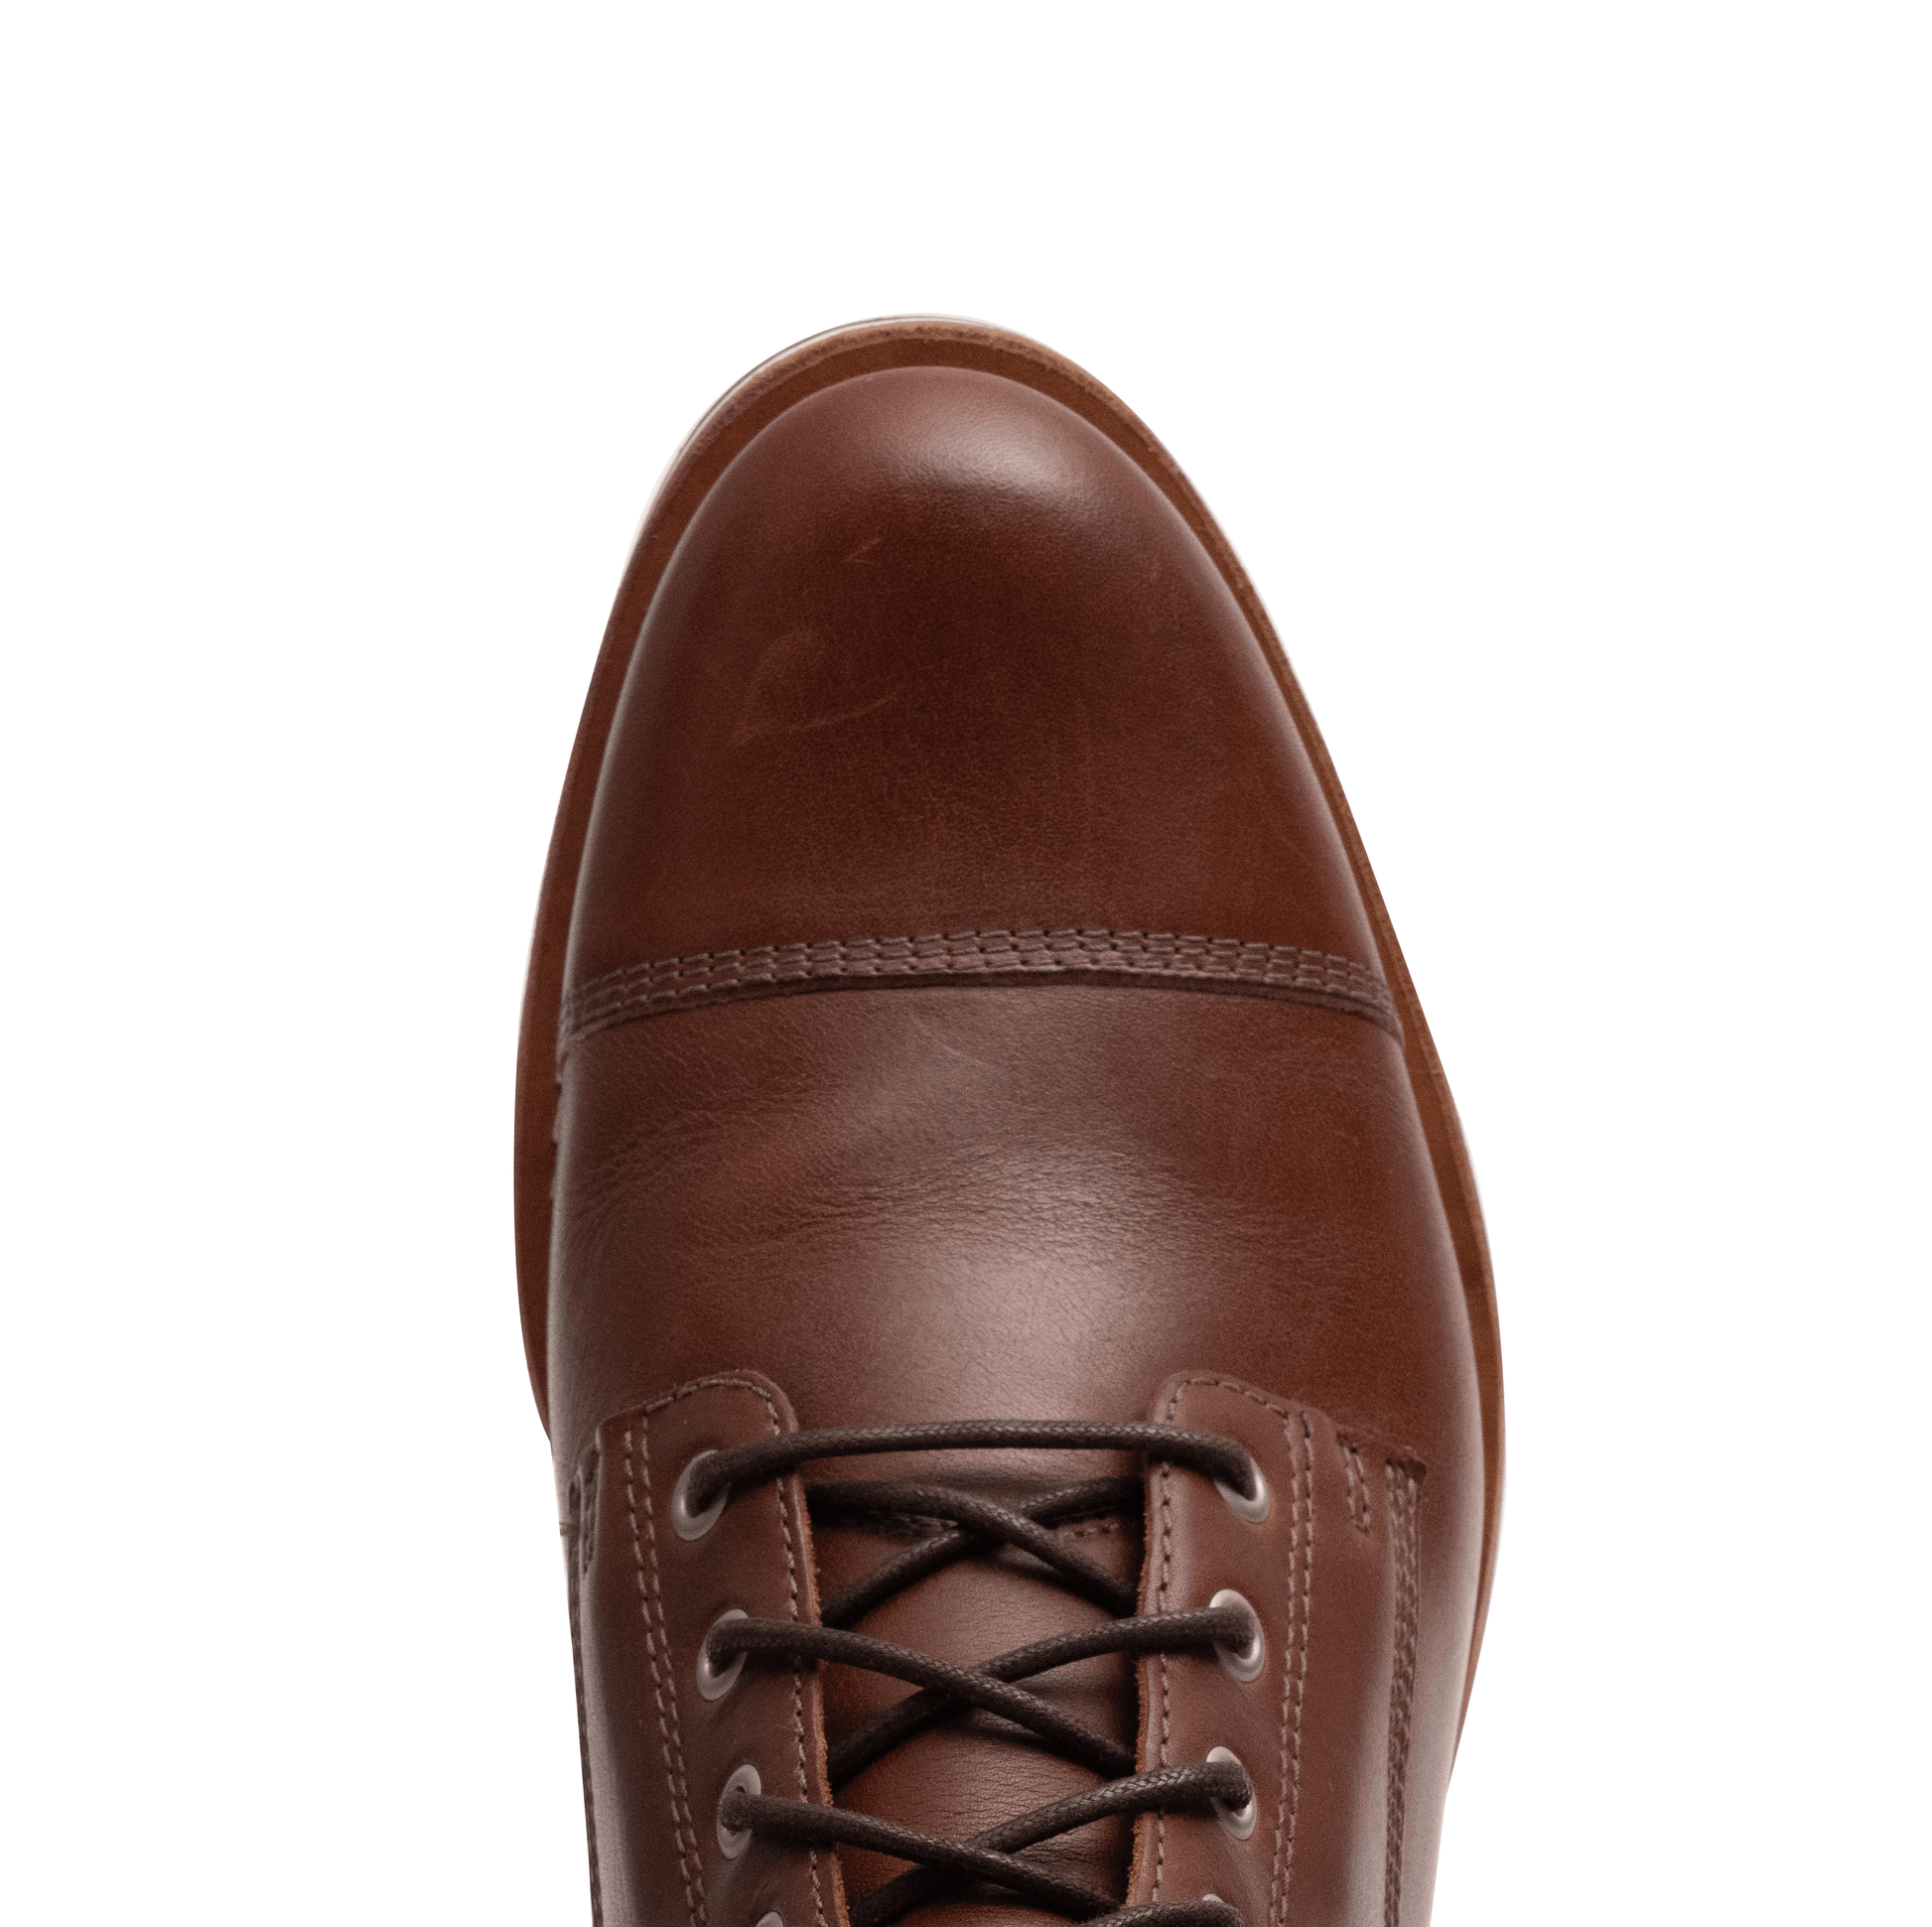 HELM Boots The Hollis Brown Toe